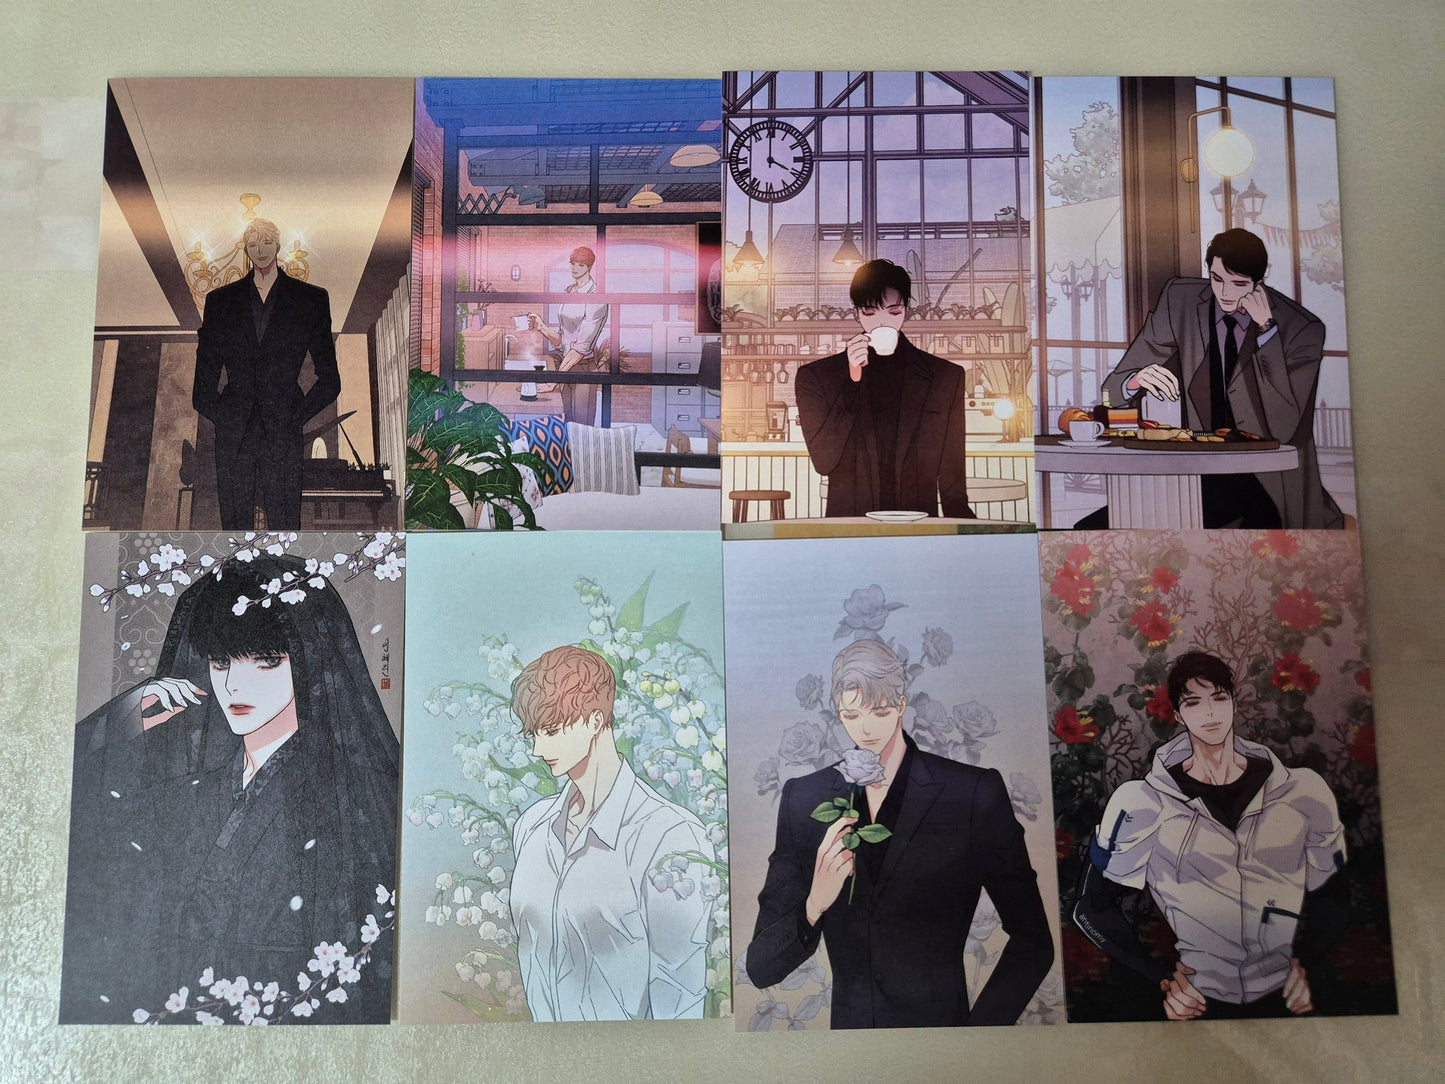 Missing Love(A Marrying Man) : Postcards set